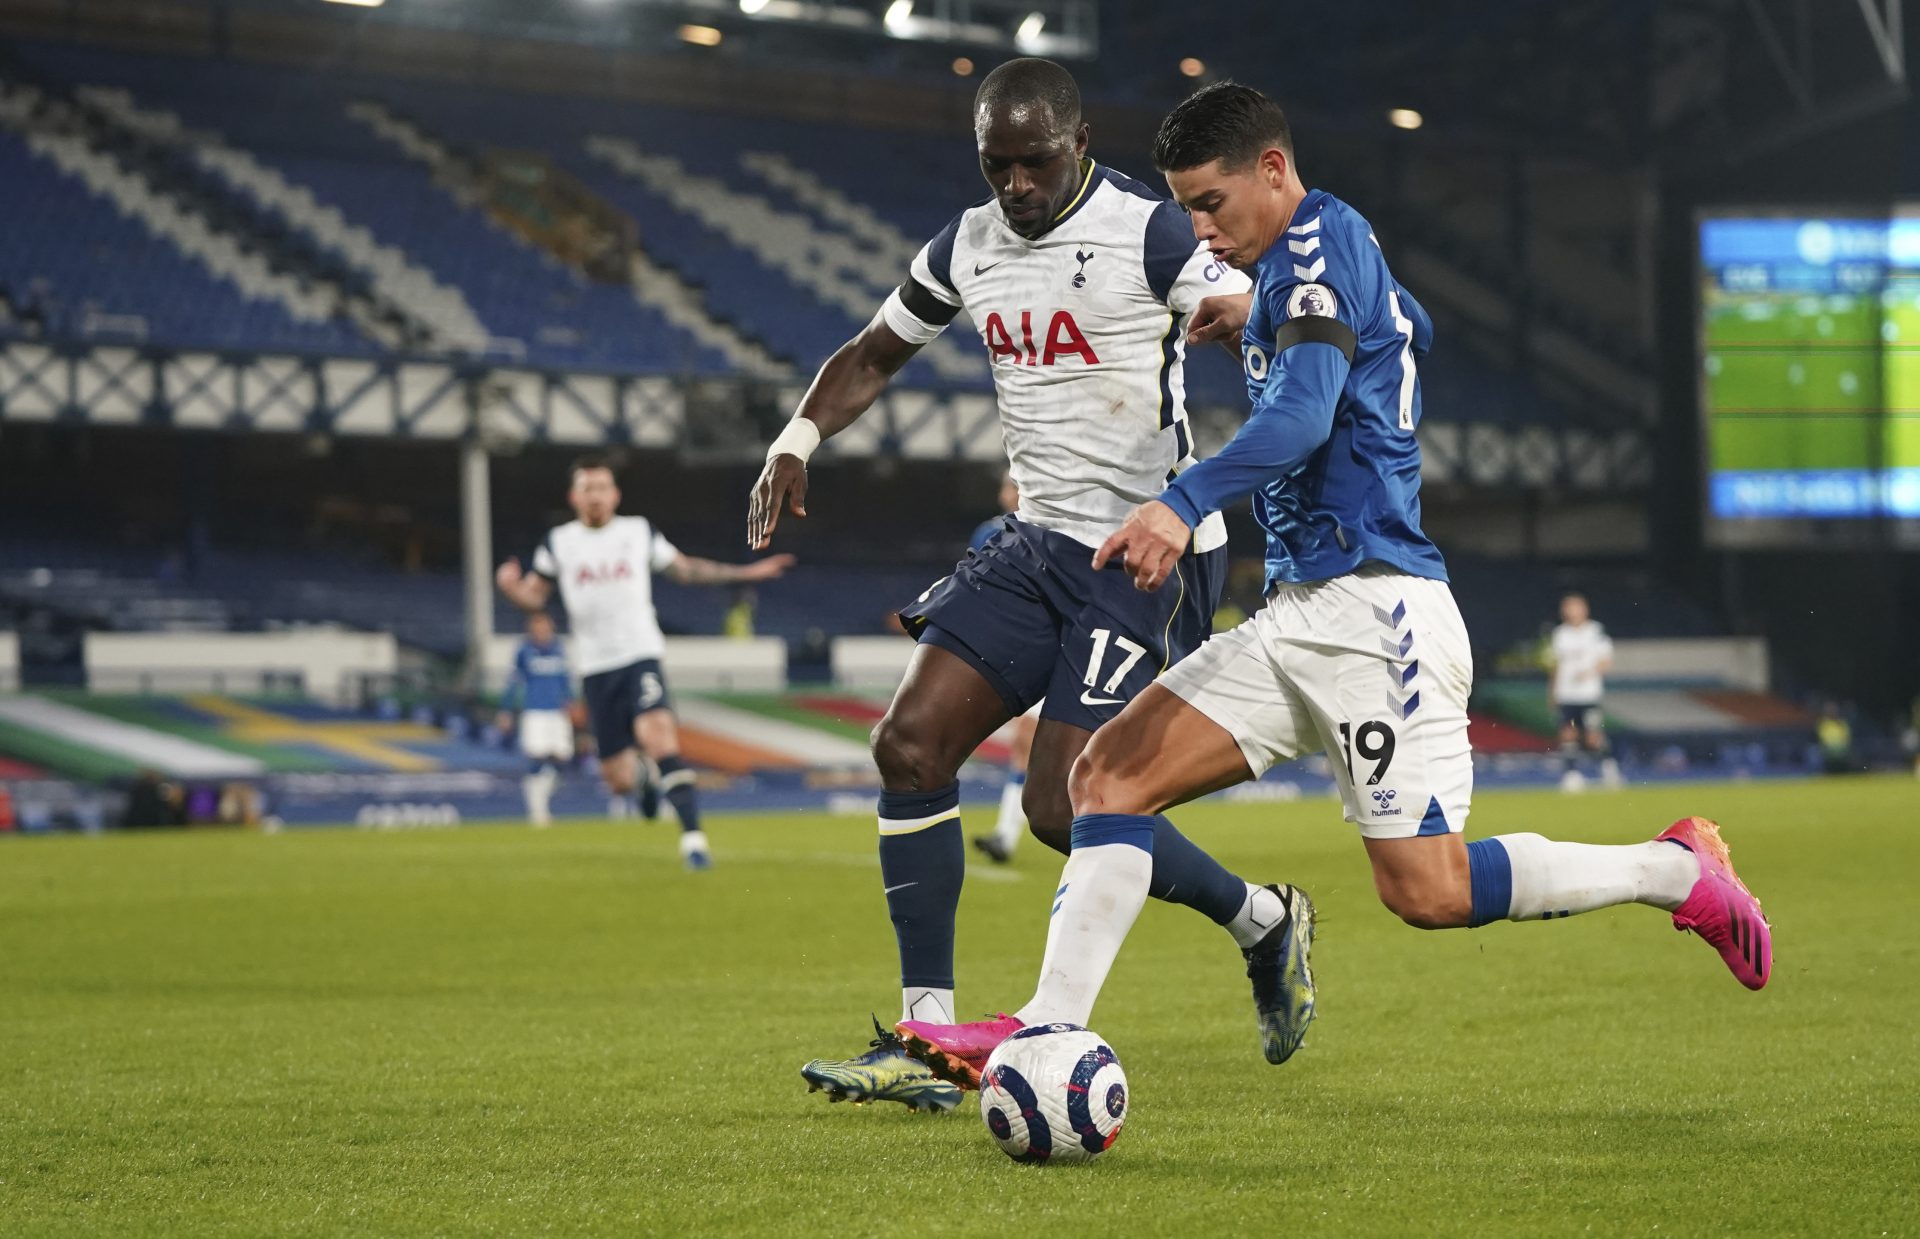 Everton's James Rodriguez, front, duels for the ball with Tottenham's Moussa Sissoko during the English Premier League soccer match between Everton and Tottenham Hotspur at Goodison Park in Liverpool, England, Friday, April 16, 2021.